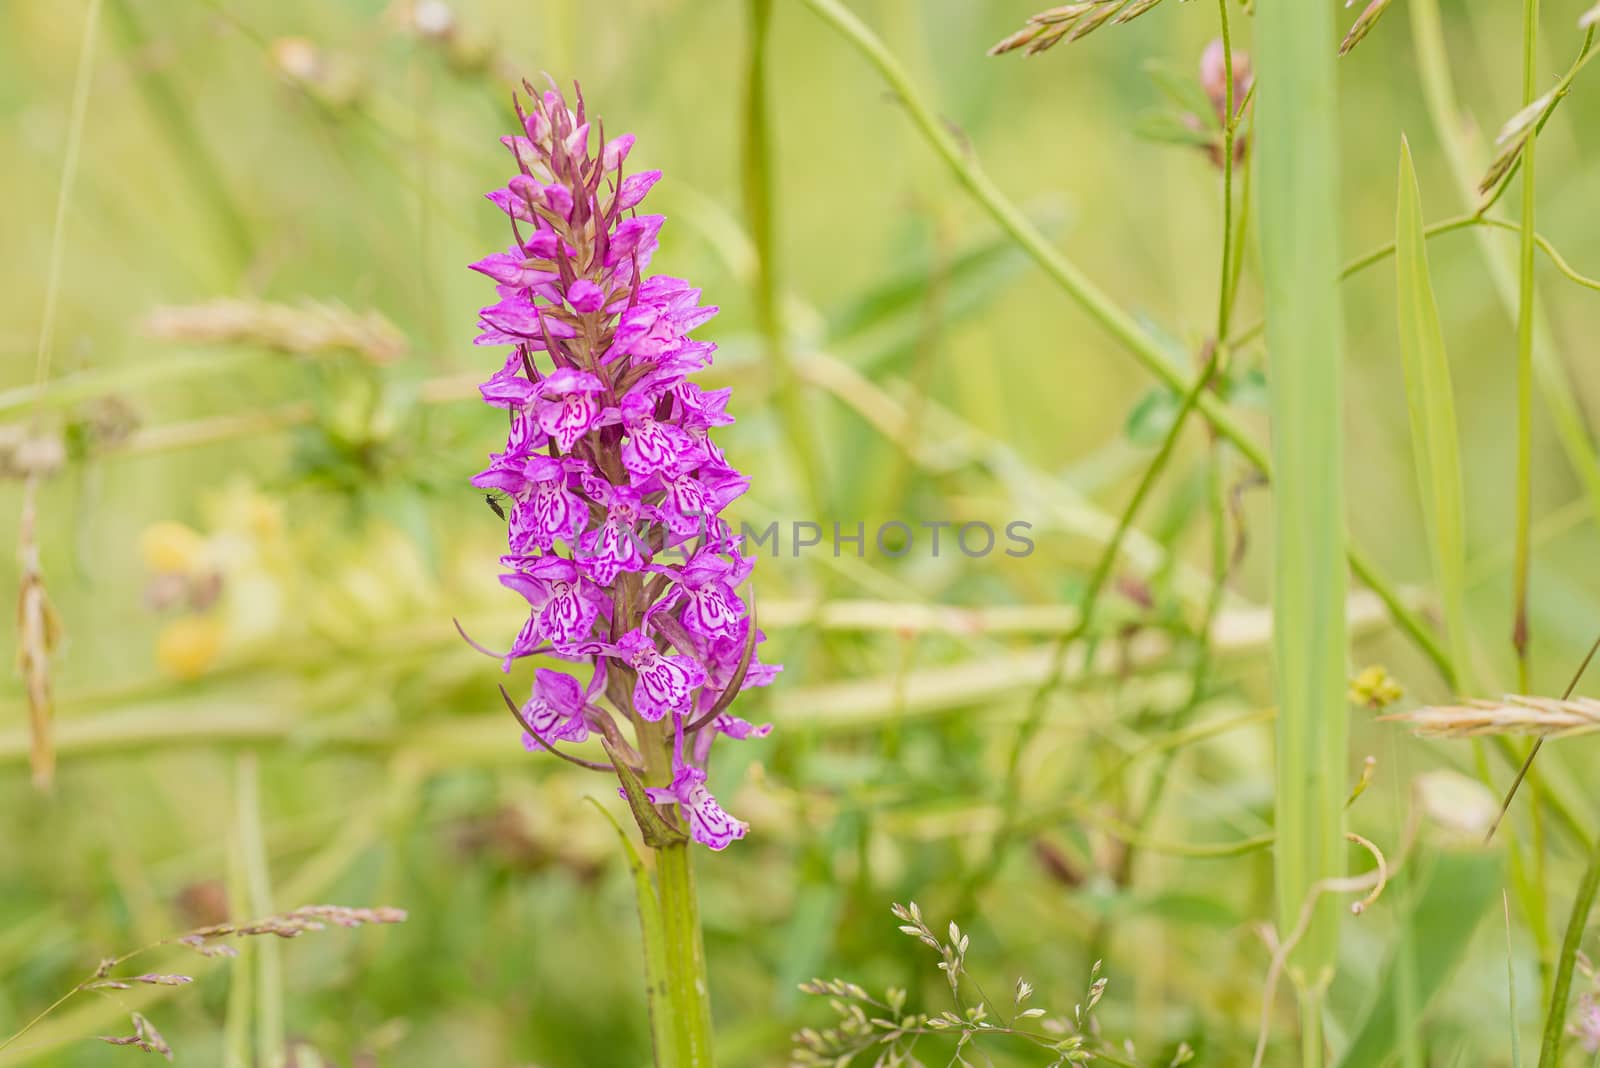 Spotted orchid inflorescence, North Holland, the Netherlands by Pendleton